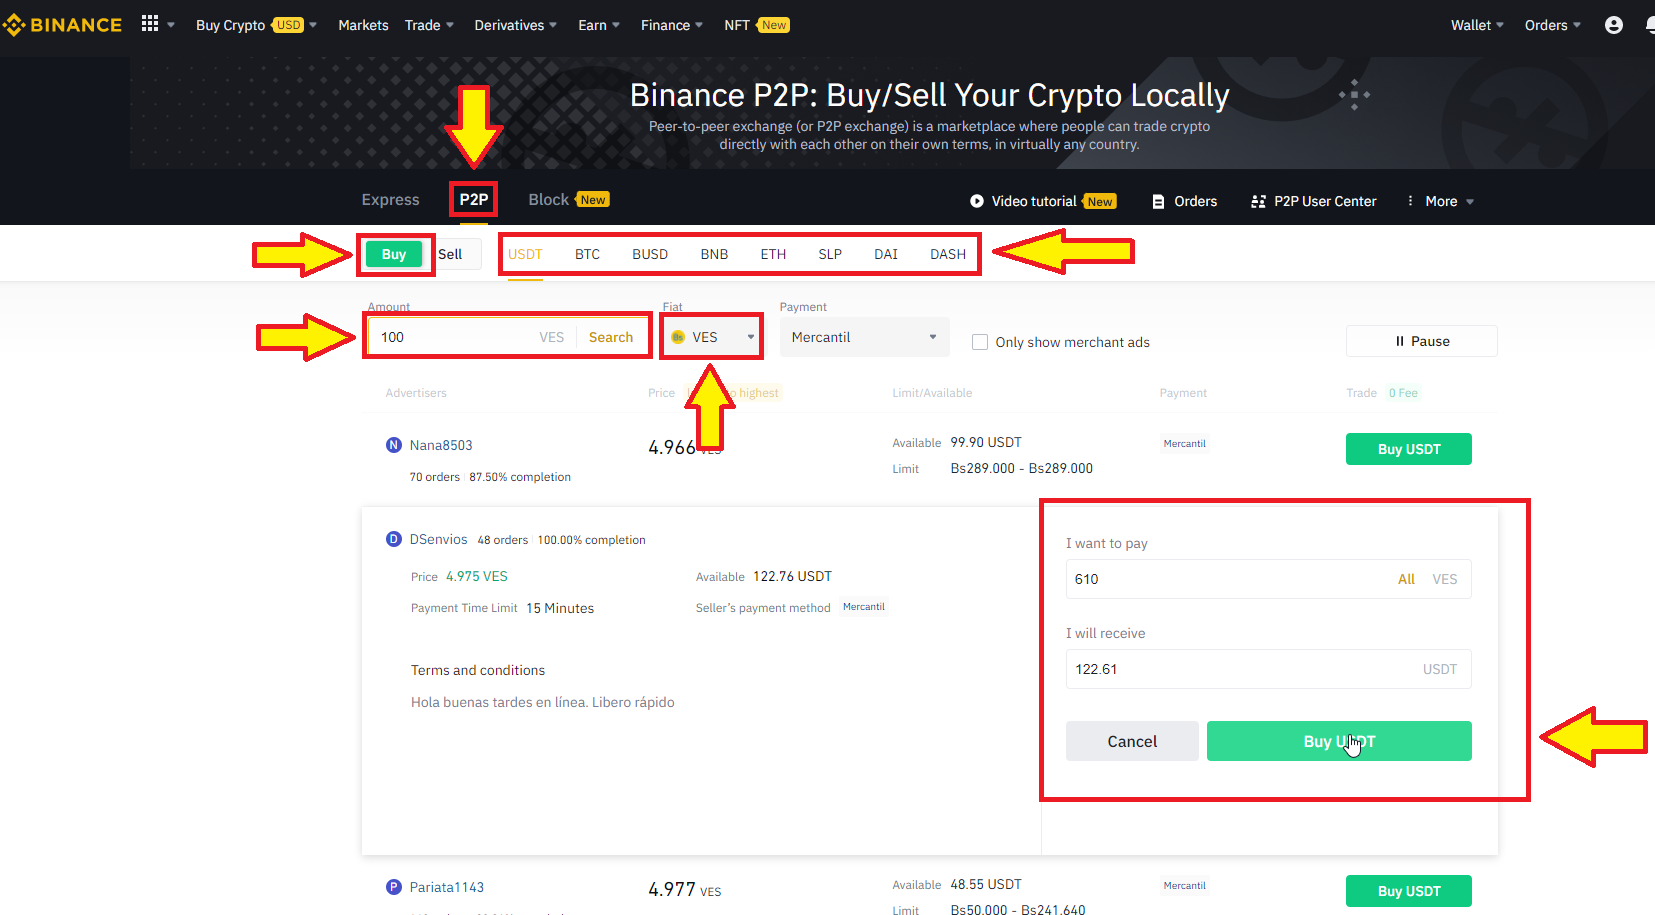 Buy Unikoin Gold crypto in P2P with a verified account on Binance